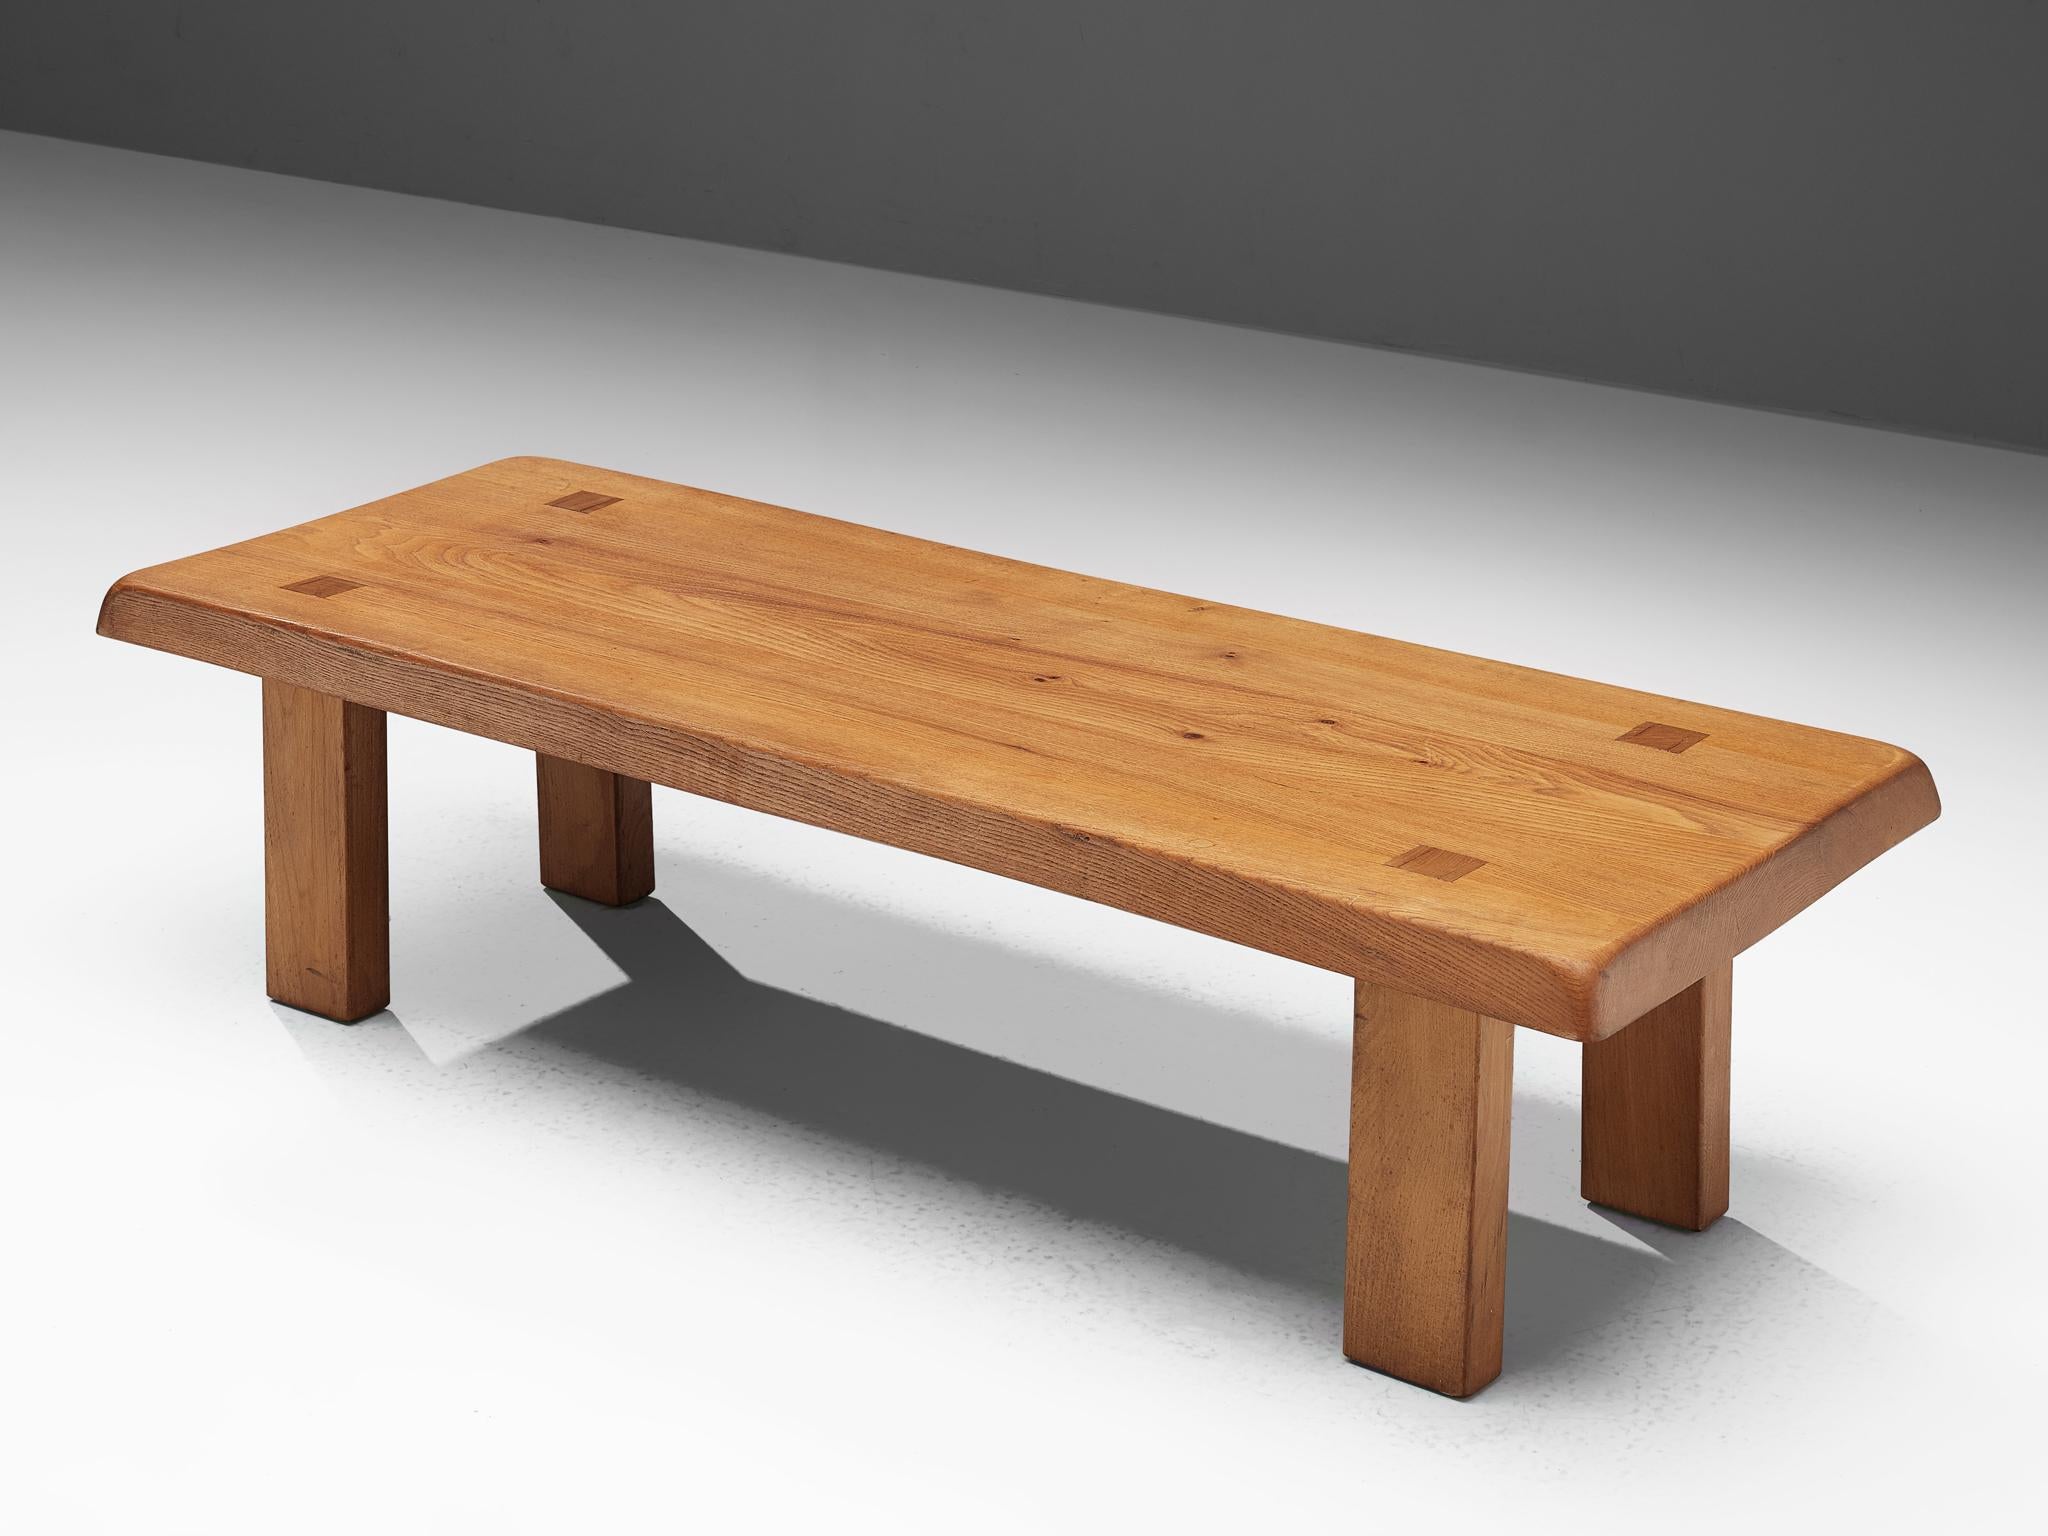 Pierre Chapo, T08 coffee table or bench, solid elm, France, circa 1965.

A rectangular-shaped coffee table by Pierre Chapo from the 1960s. The cocktail table is modest and rationalist in its design. Only decorative detail is the wood connection of